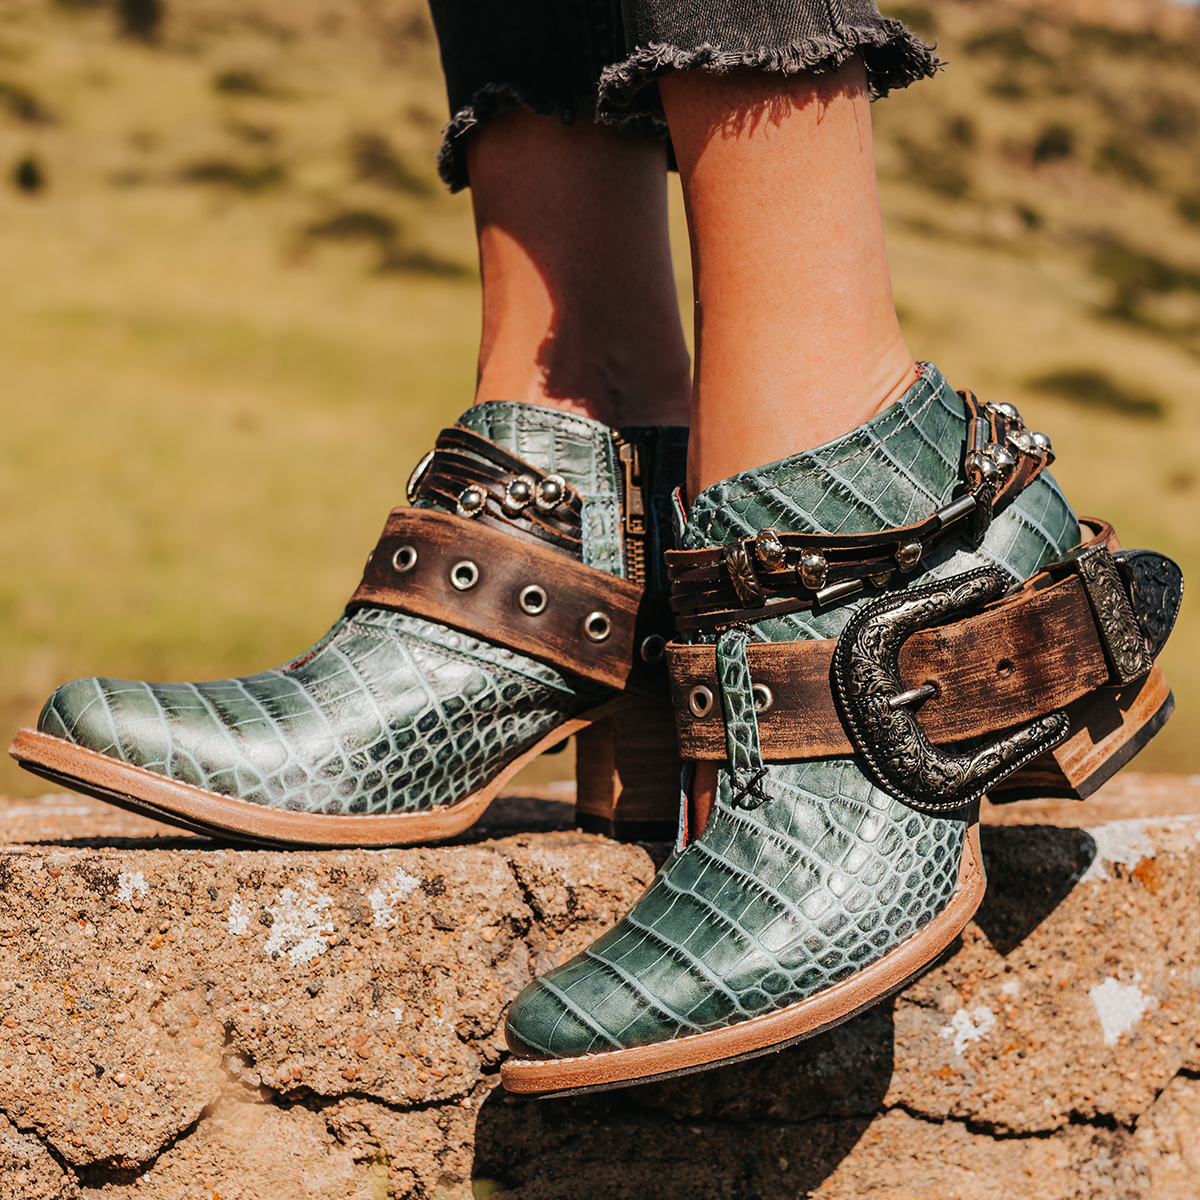 FREEBIRD women’s Saloon turquoise croco leather front cutout bootie with embellished belts and side western buckle